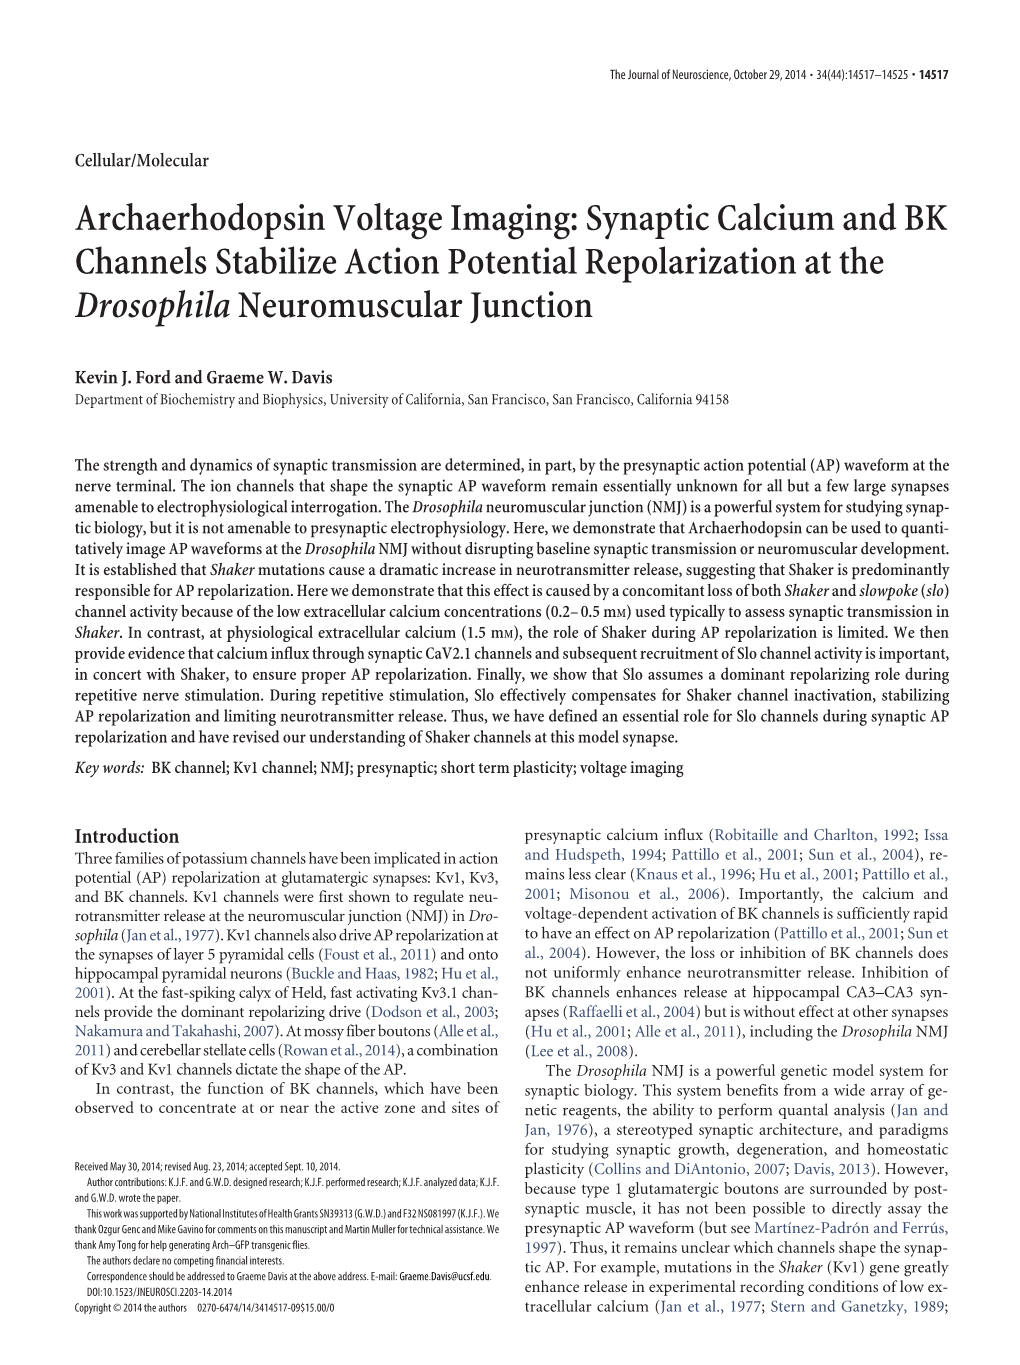 Archaerhodopsin Voltage Imaging: Synaptic Calcium and BK Channels Stabilize Action Potential Repolarization at the Drosophilaneu